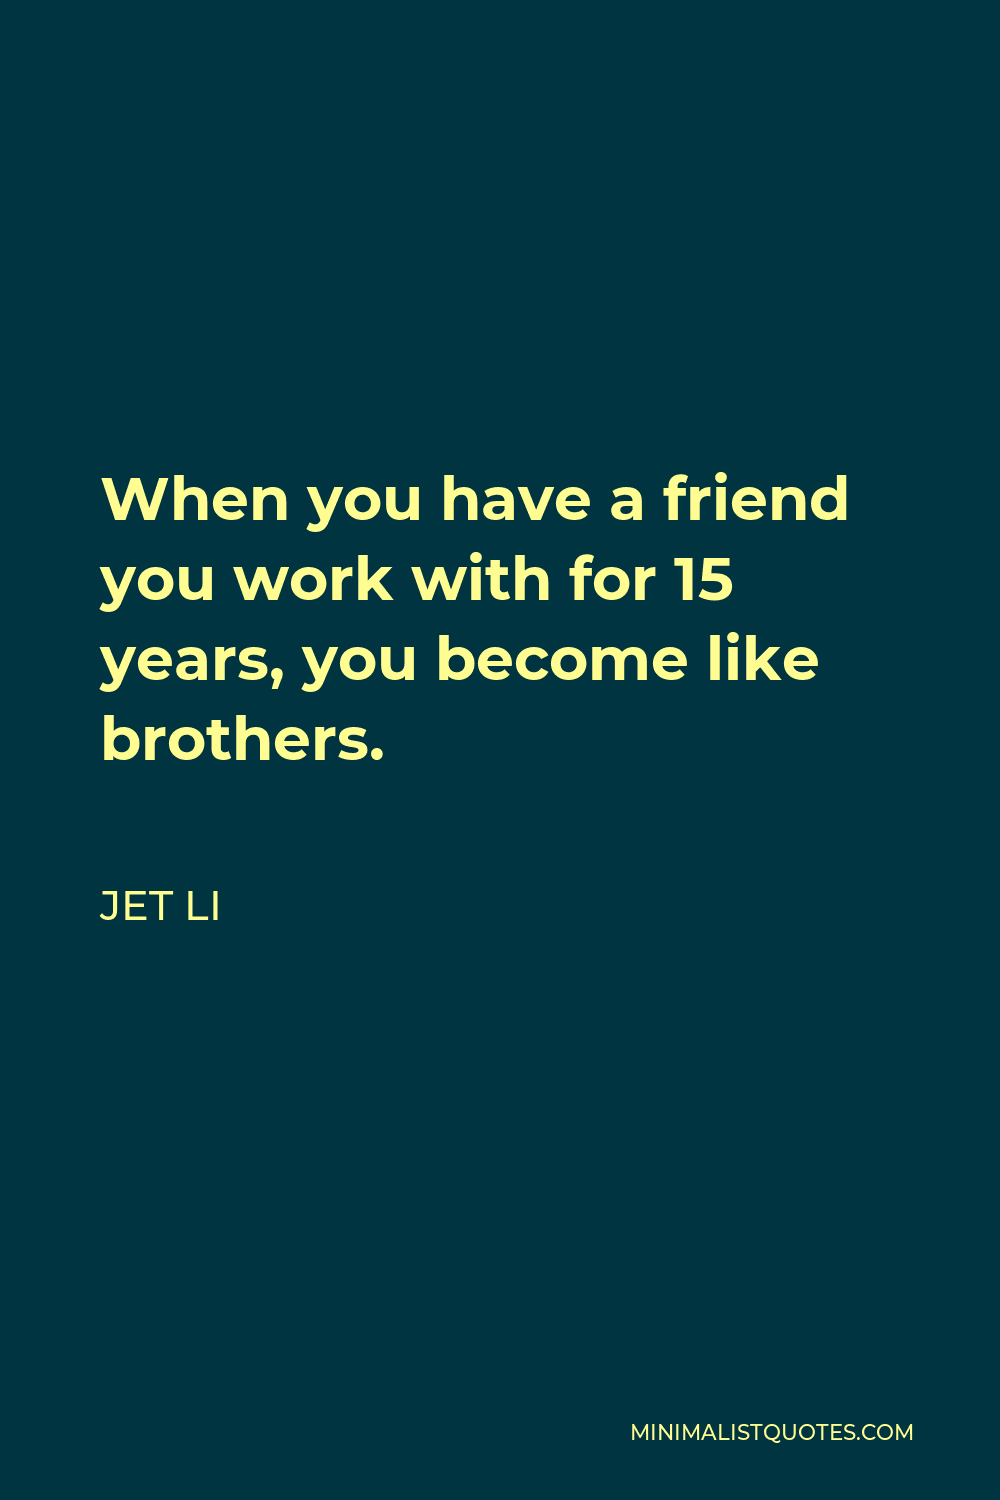 Jet Li Quote - When you have a friend you work with for 15 years, you become like brothers.